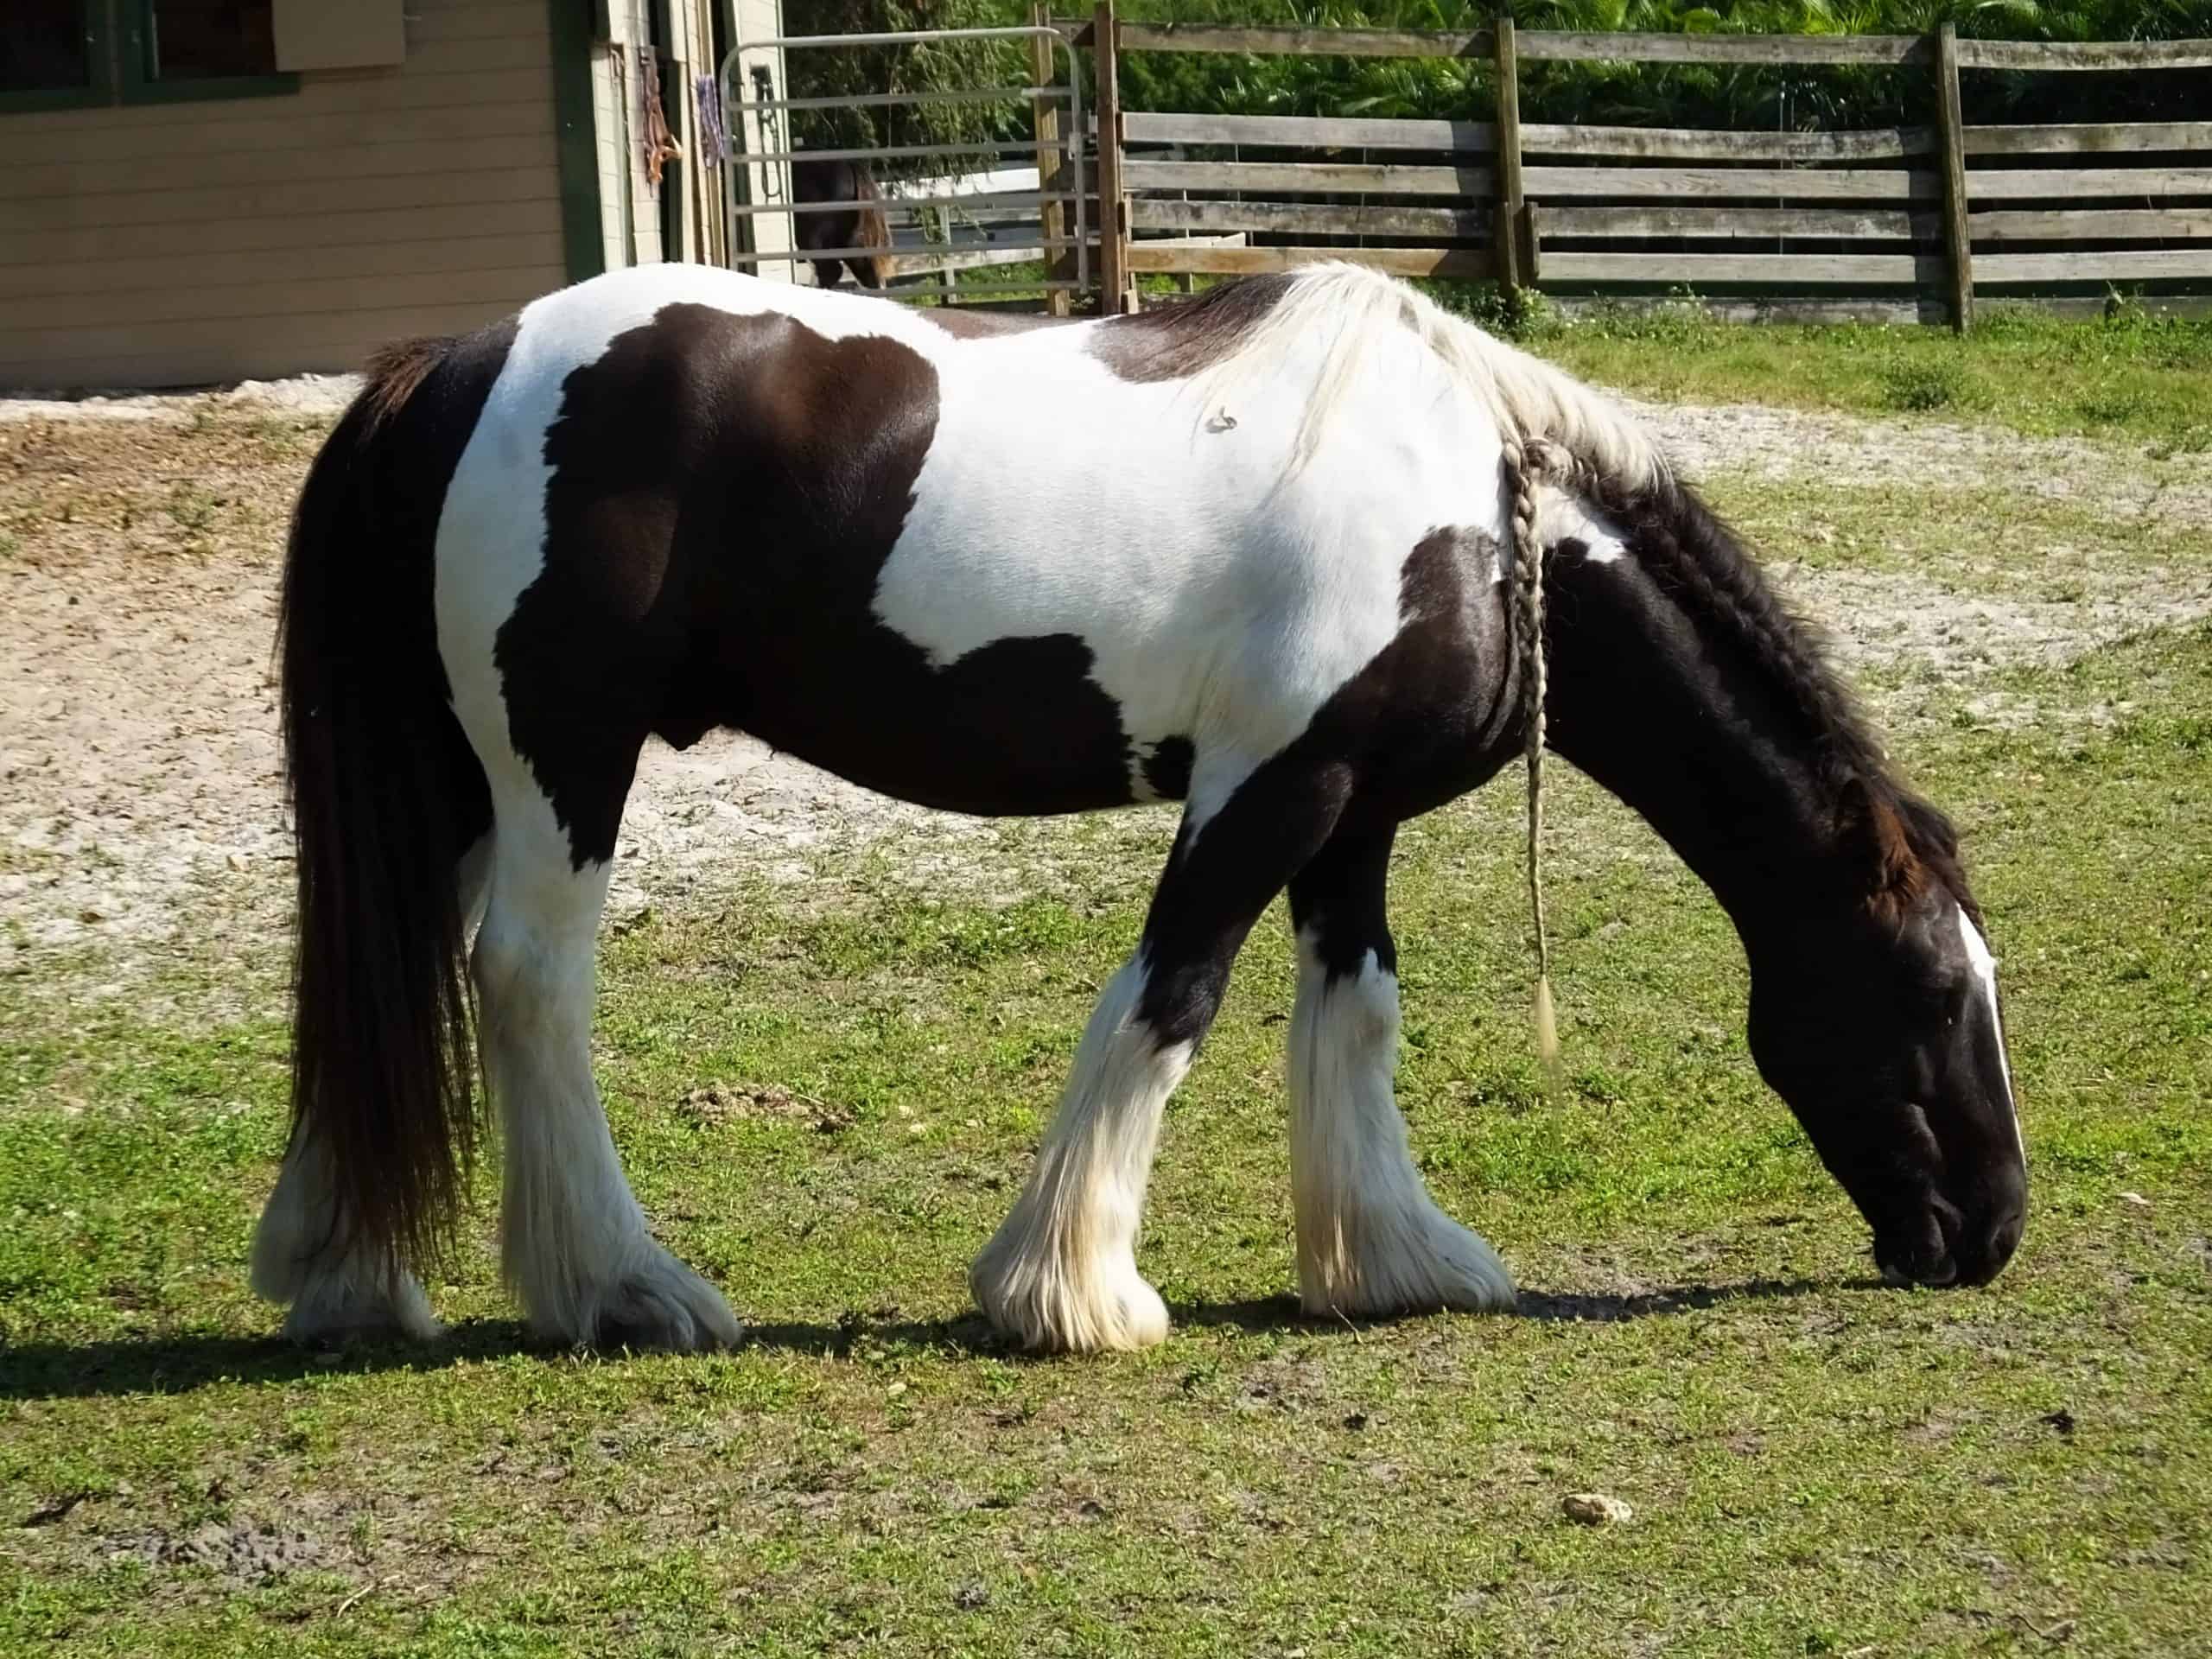 Gypsy Vanner Horse with a braided mane grazing on the grass.